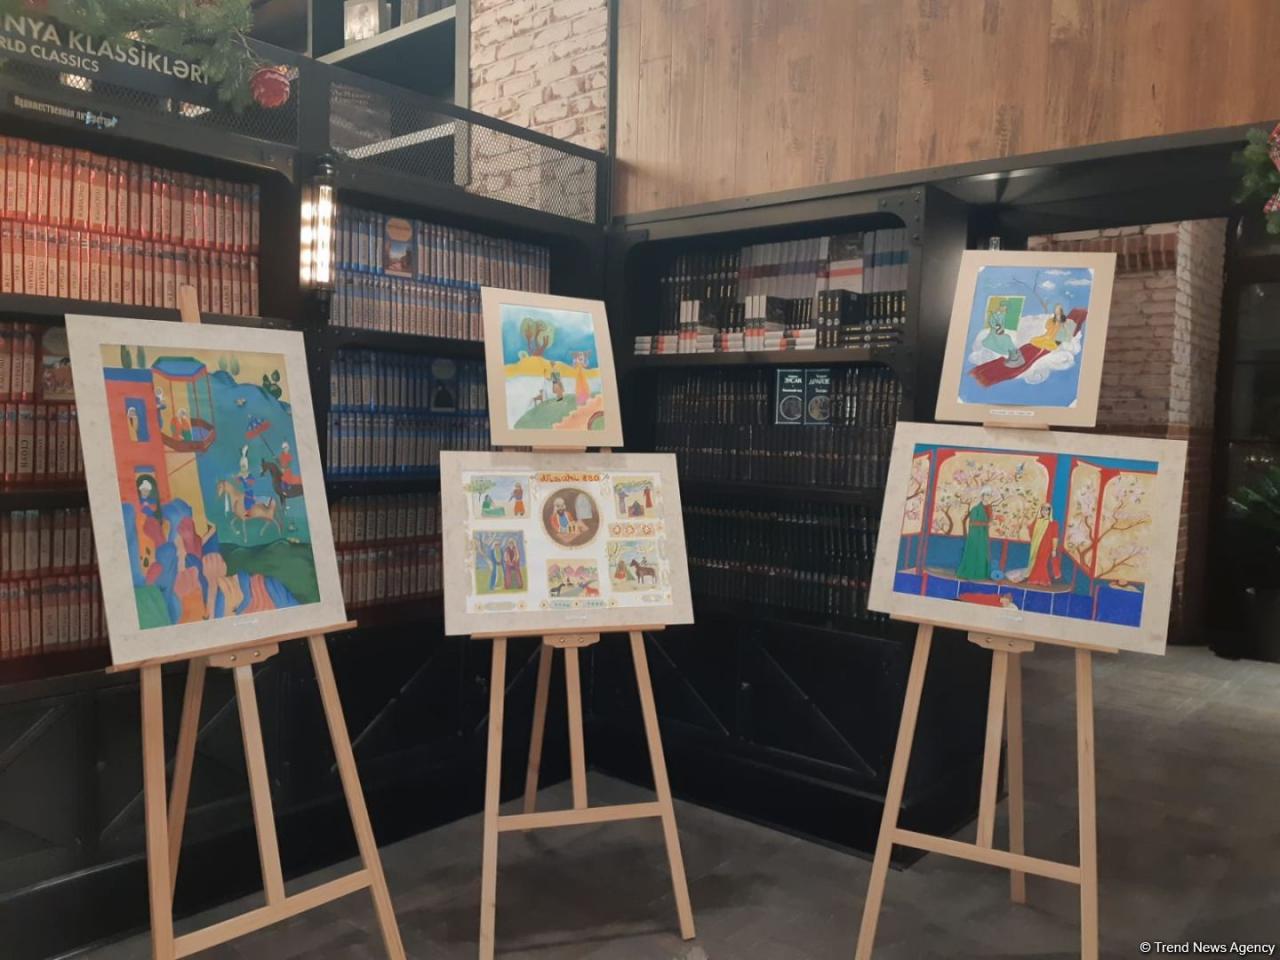 Baku Book Center opens exhibition of young talents [PHOTO]